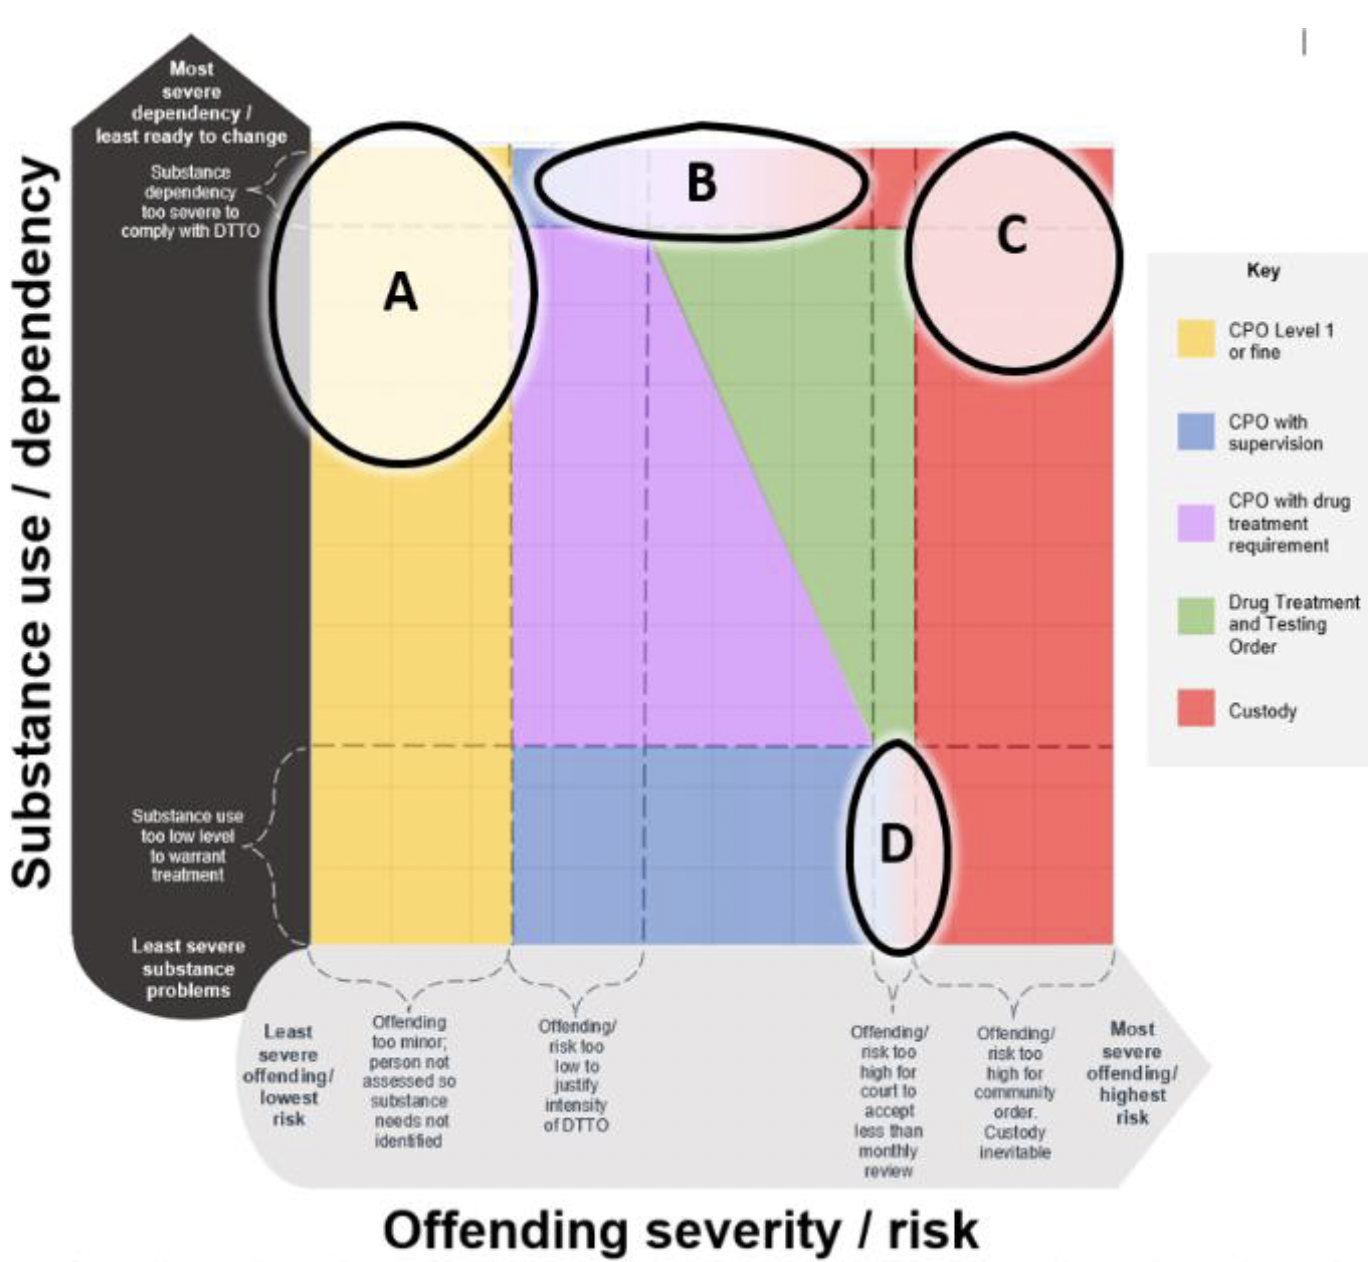 Diagram showing the approximate relationship between substance use and offending severity as criteria for community orders, with groups A to D shown